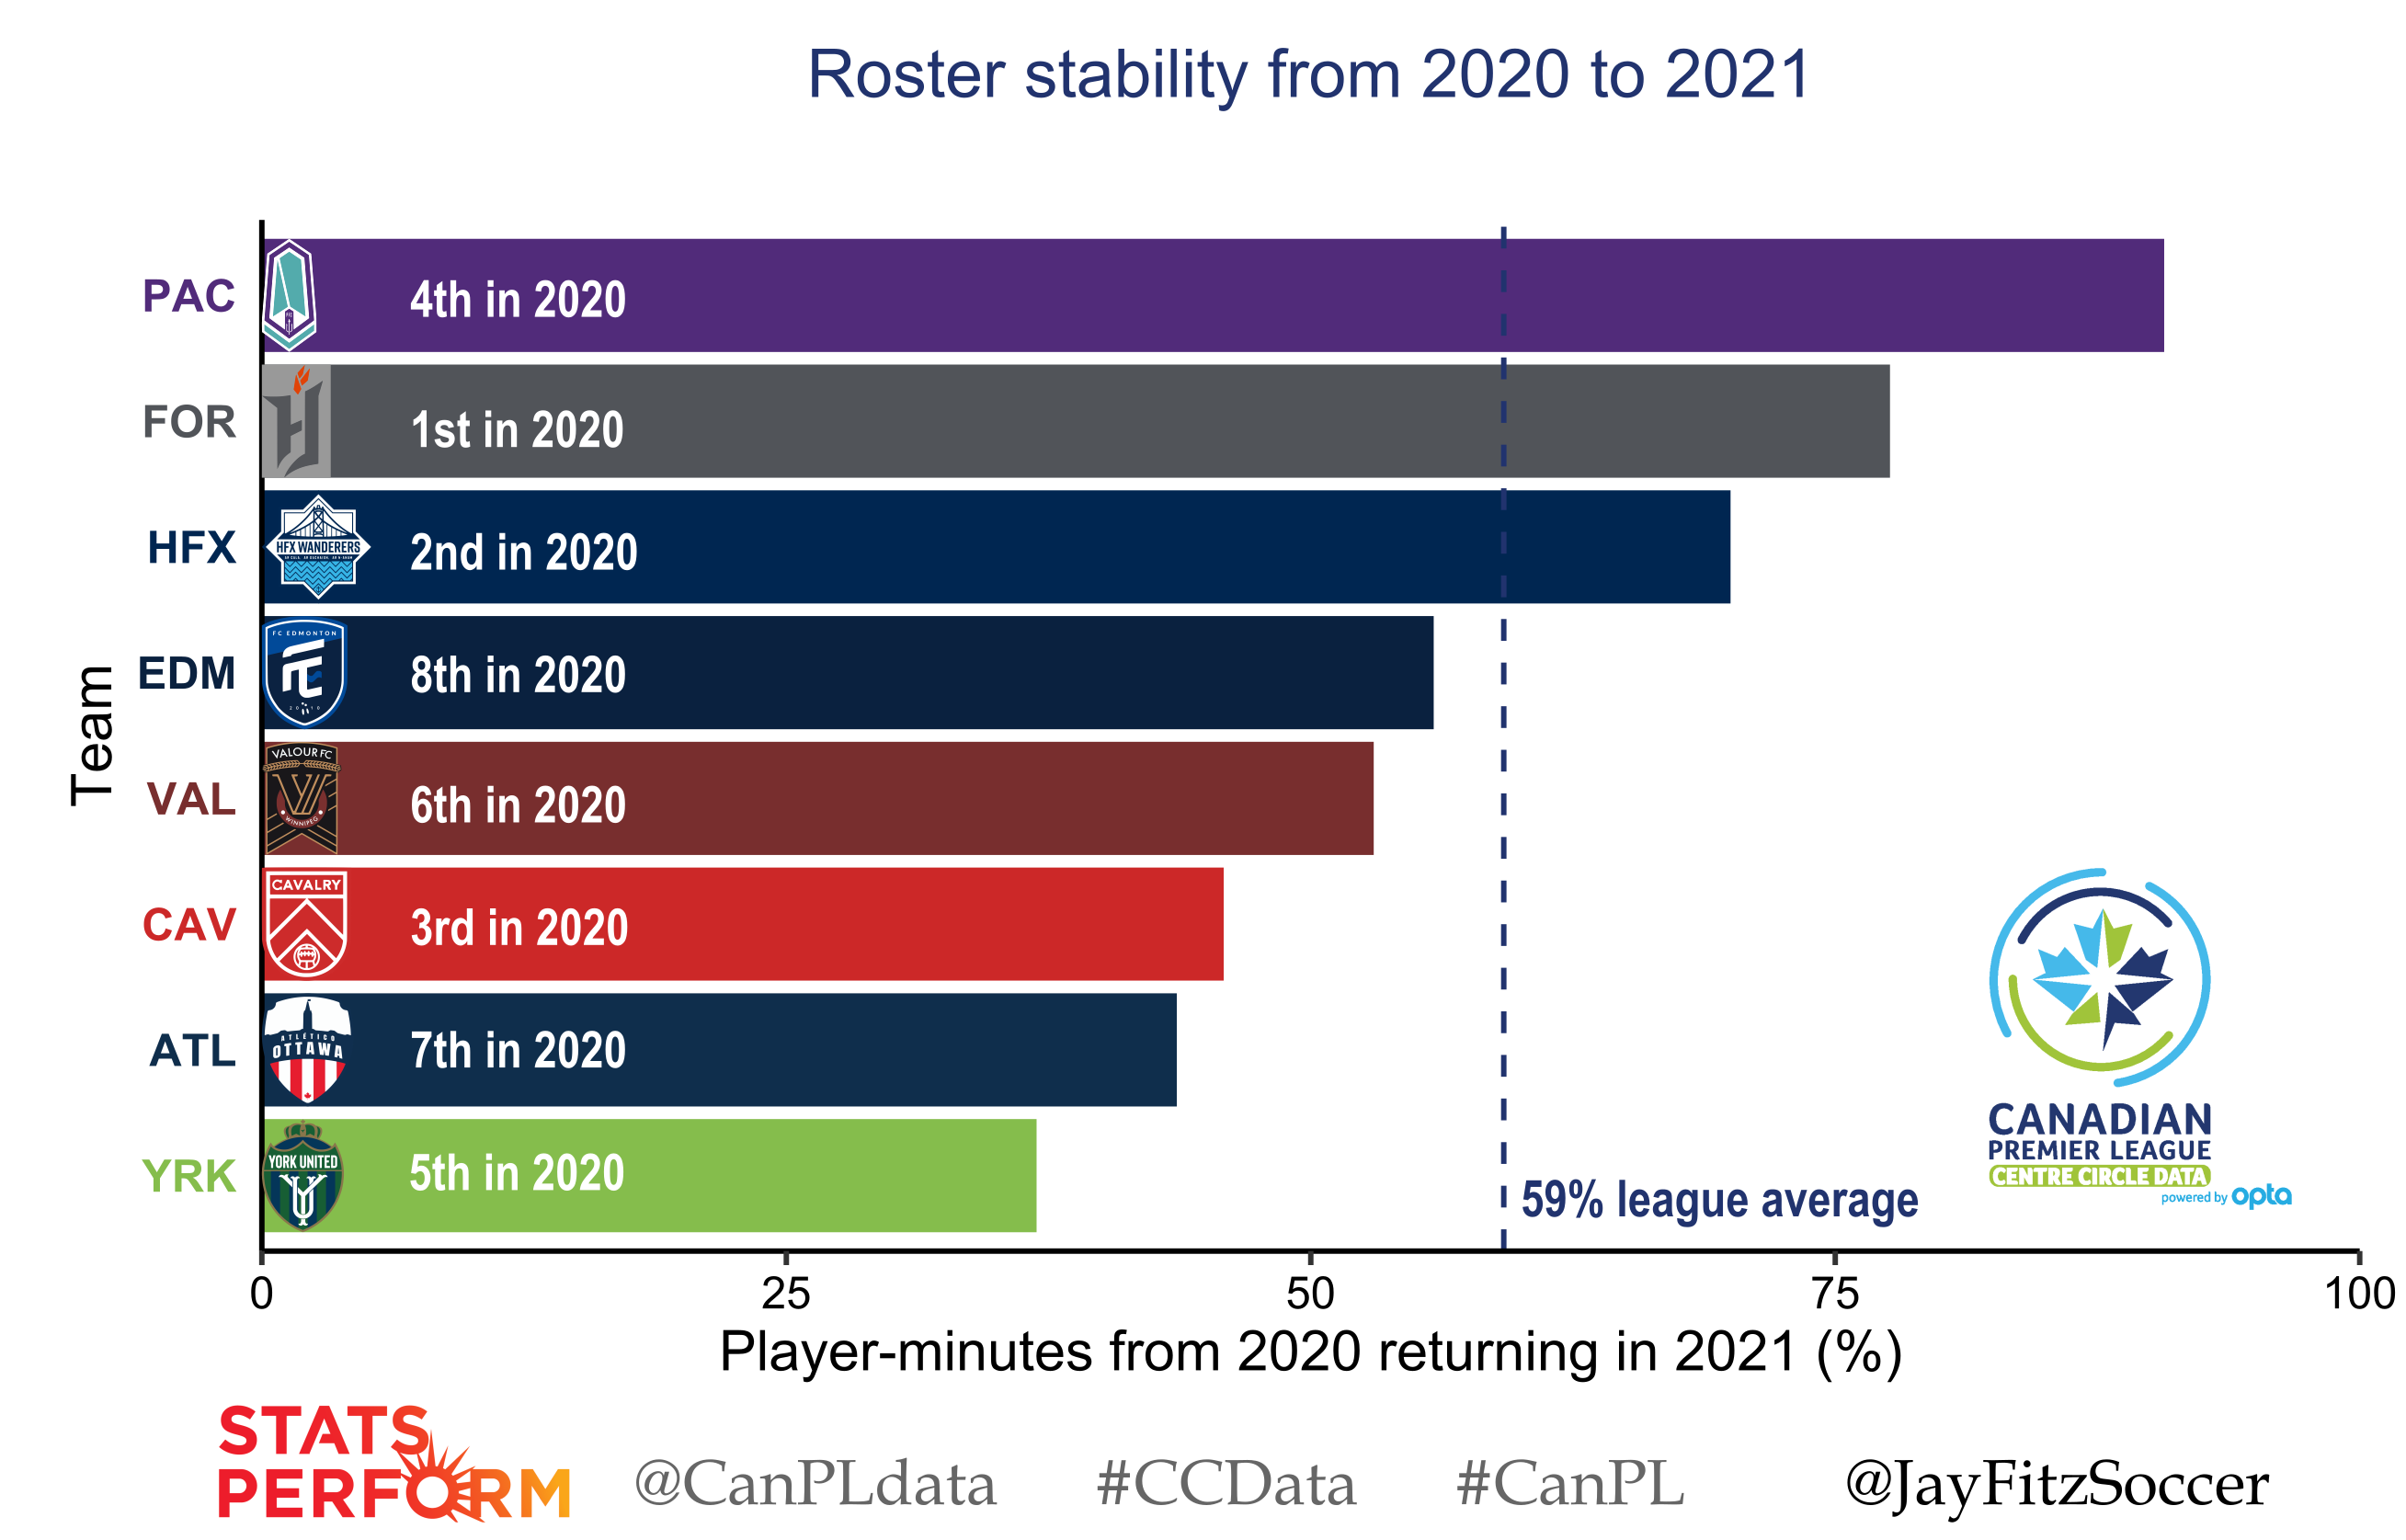 Graph of roster stability by team from 2020 to 2021. Each team is a different bar, coloured with the team colours. Teams varied a lot in roster stability, from only about 35% of player-minutes returning for York, to about 90% of player-minutes returning for Pacific FC.